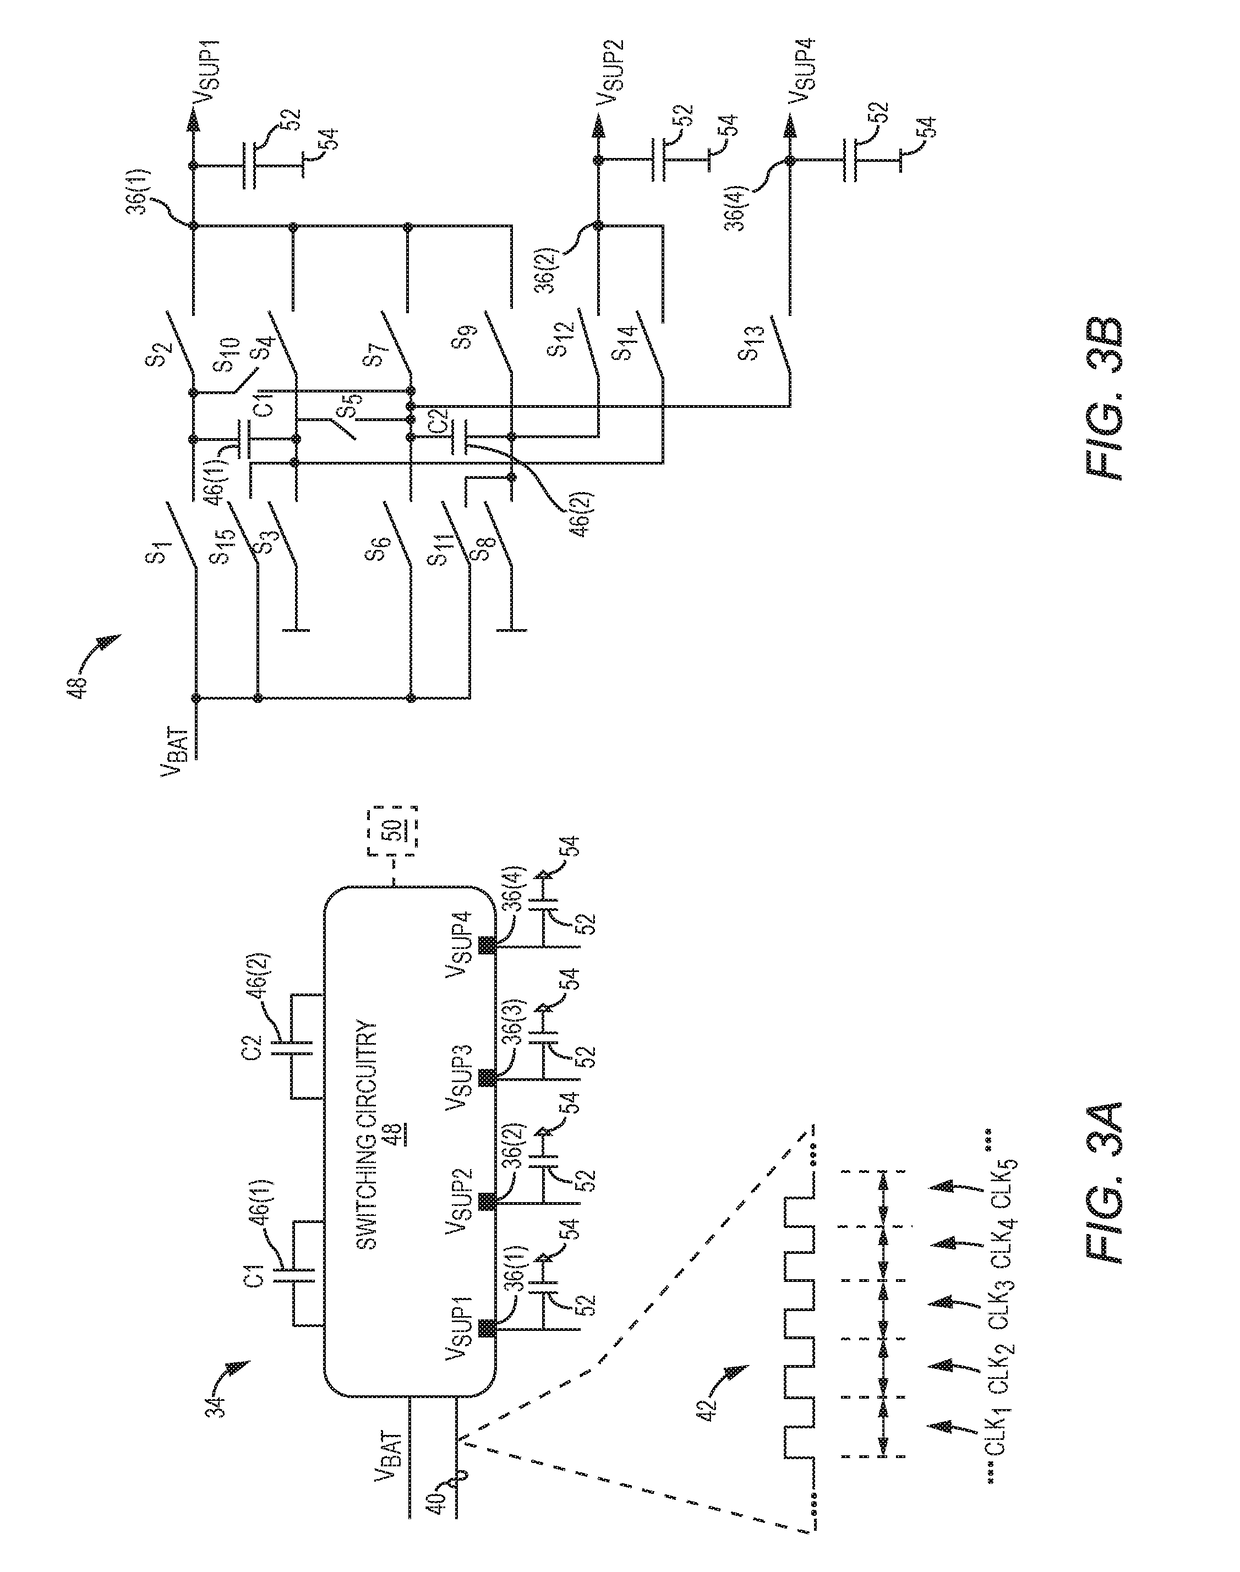 Power management circuit and related radio frequency front-end circuit